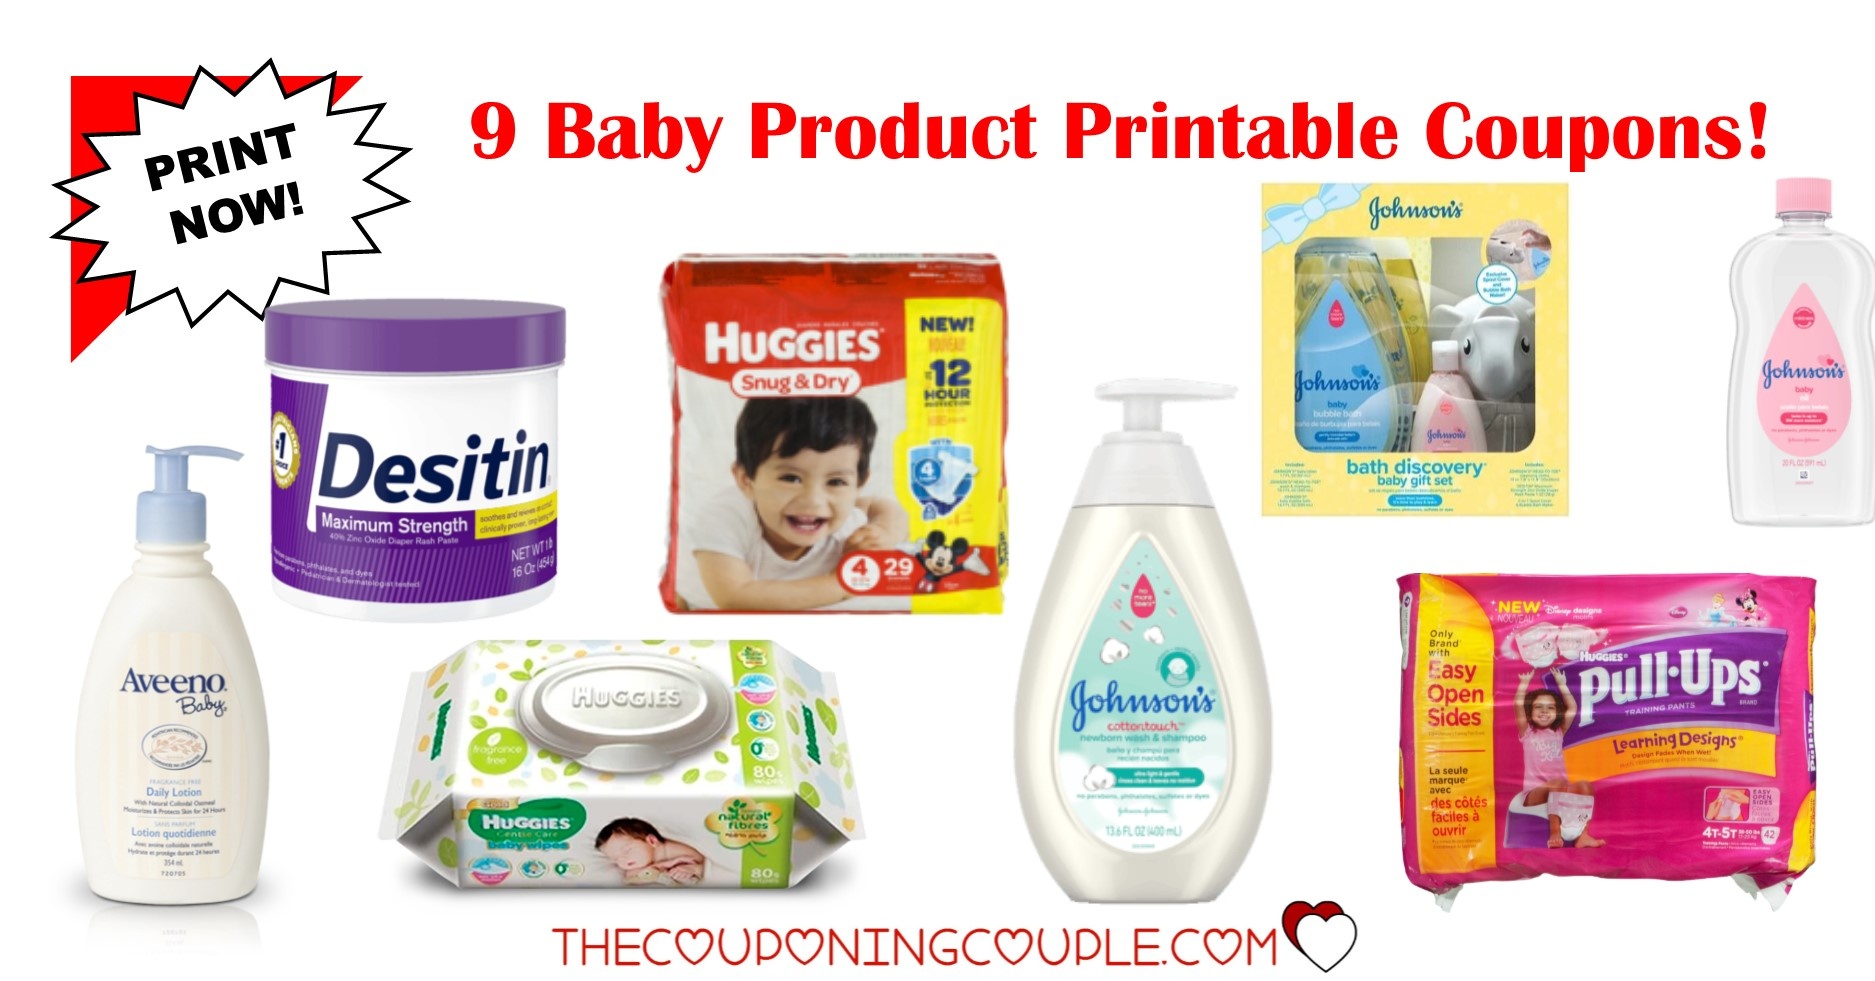 9 Baby Product Printable Coupons ~ Over $15.50 In Savings! - Free Printable Coupons For Baby Diapers